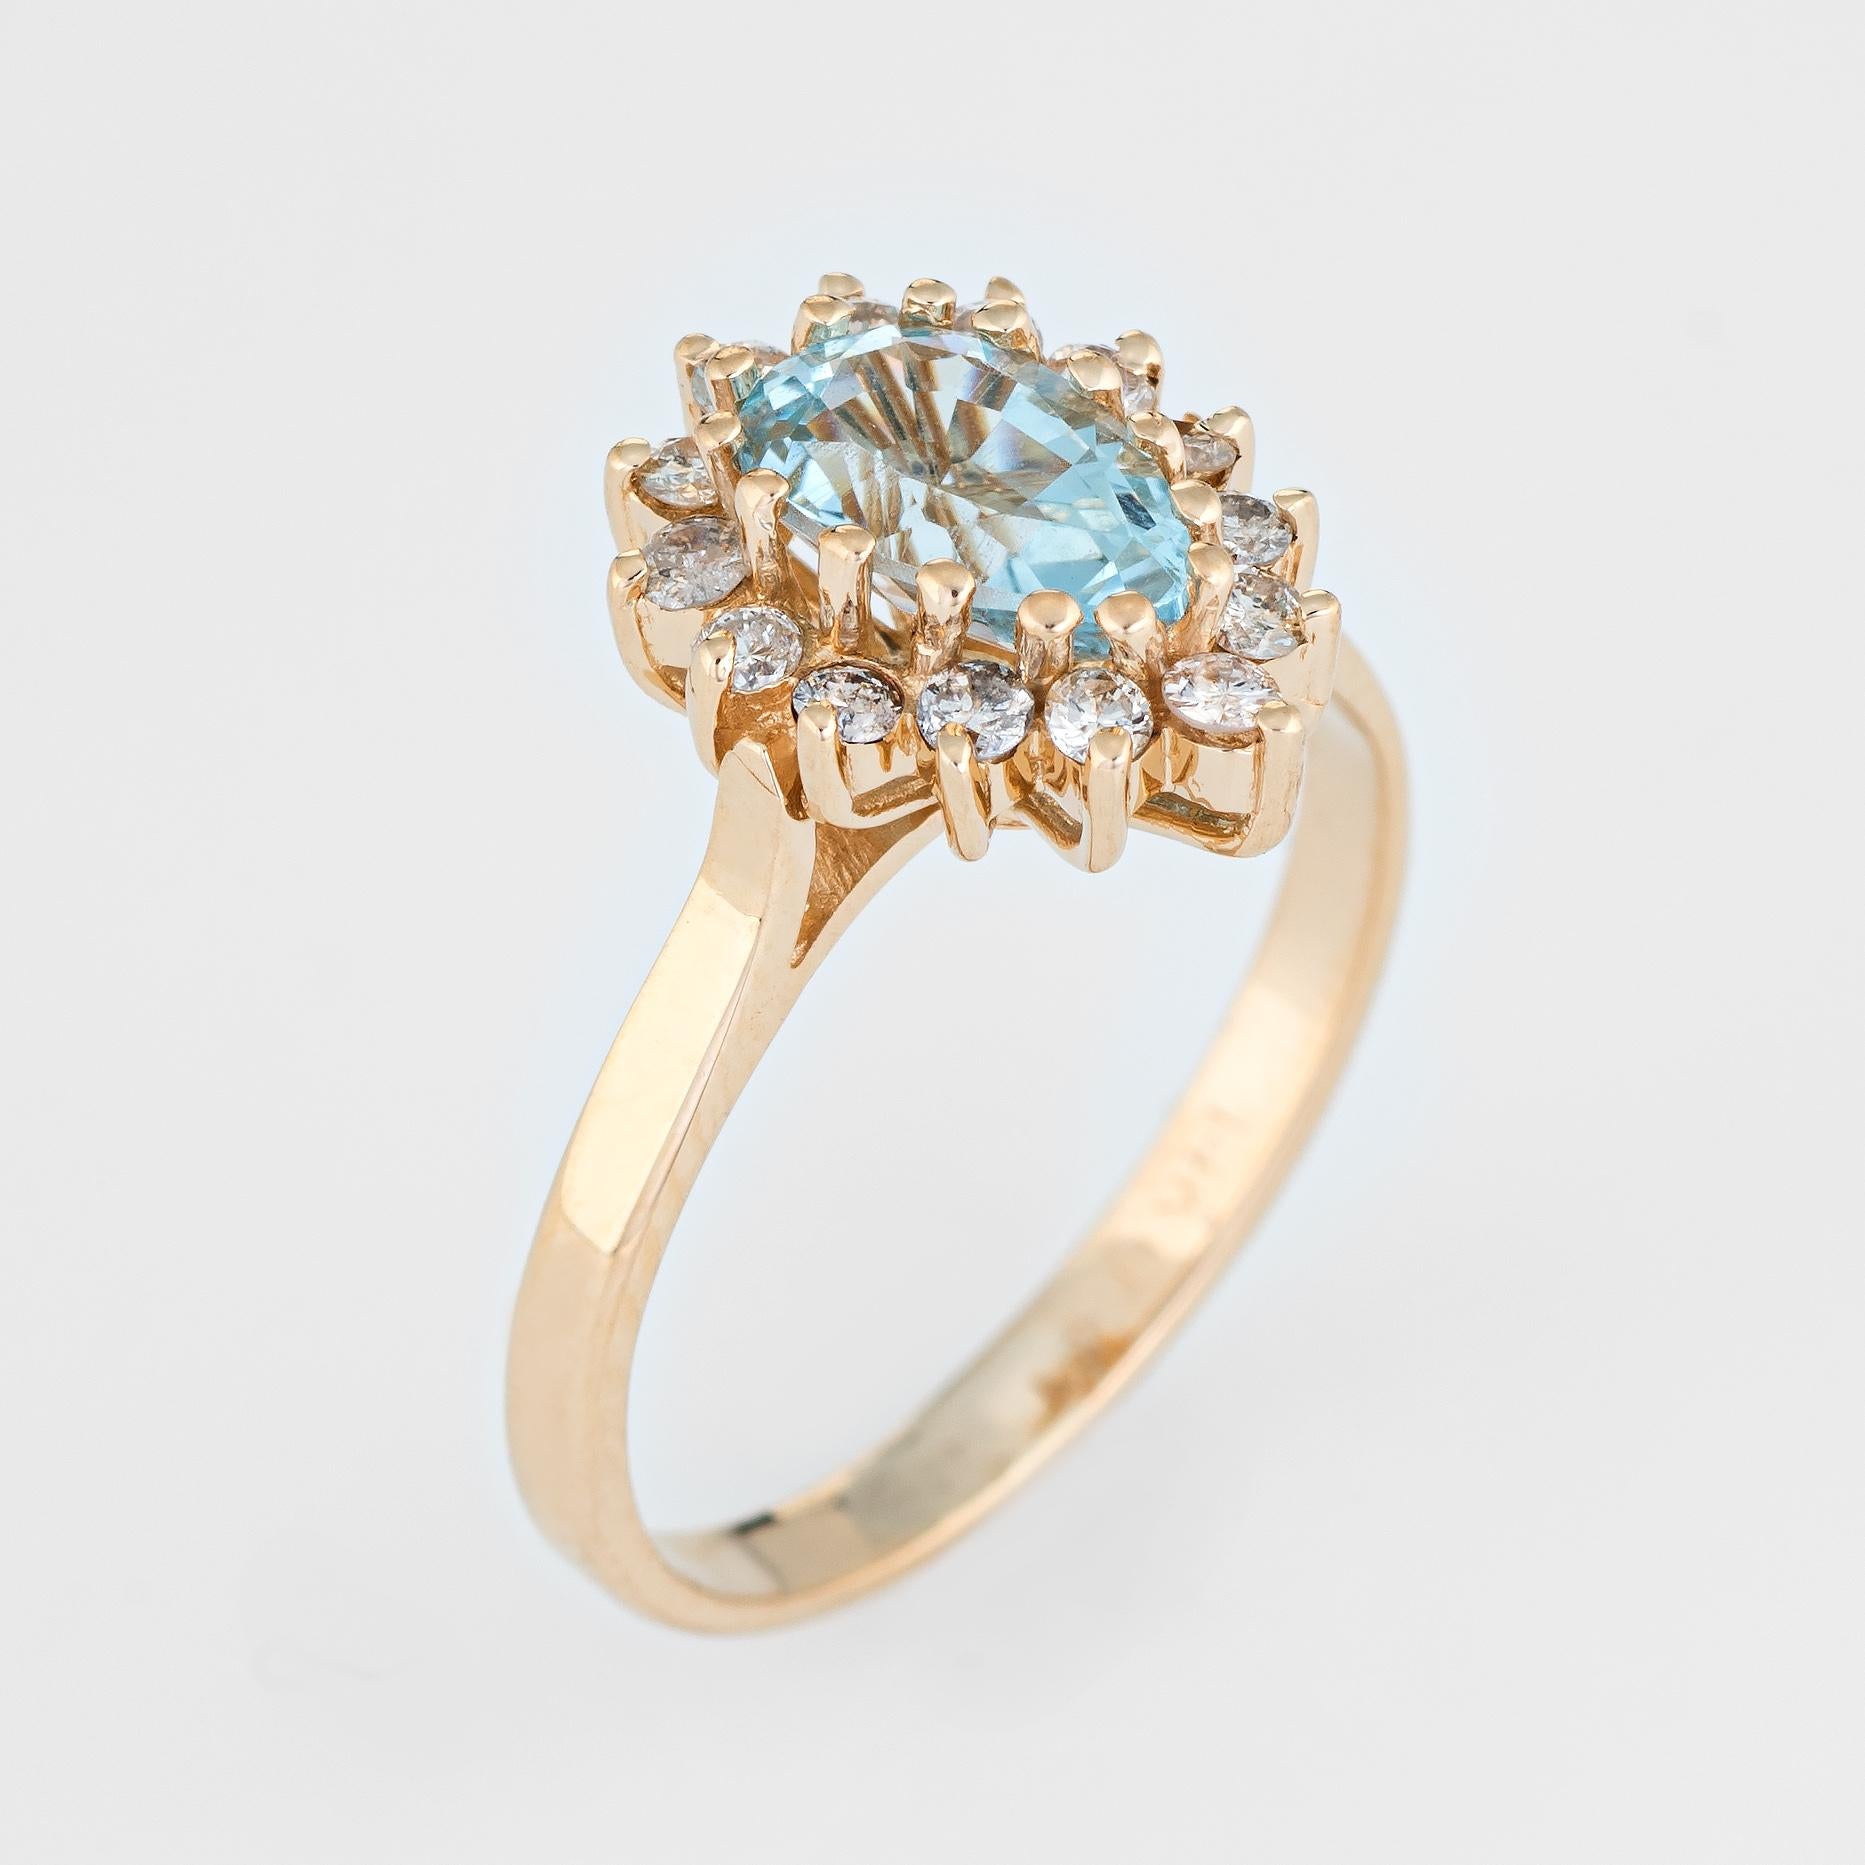 Finely detailed pear cut aquamarine & diamond cocktail ring, crafted in 14 karat yellow gold. 

Pear cut faceted aquamarine measures 7mm x 5mm (estimated at 1 carat), accented with 14 estimated 0.02 carat round brilliant cut diamonds. The total